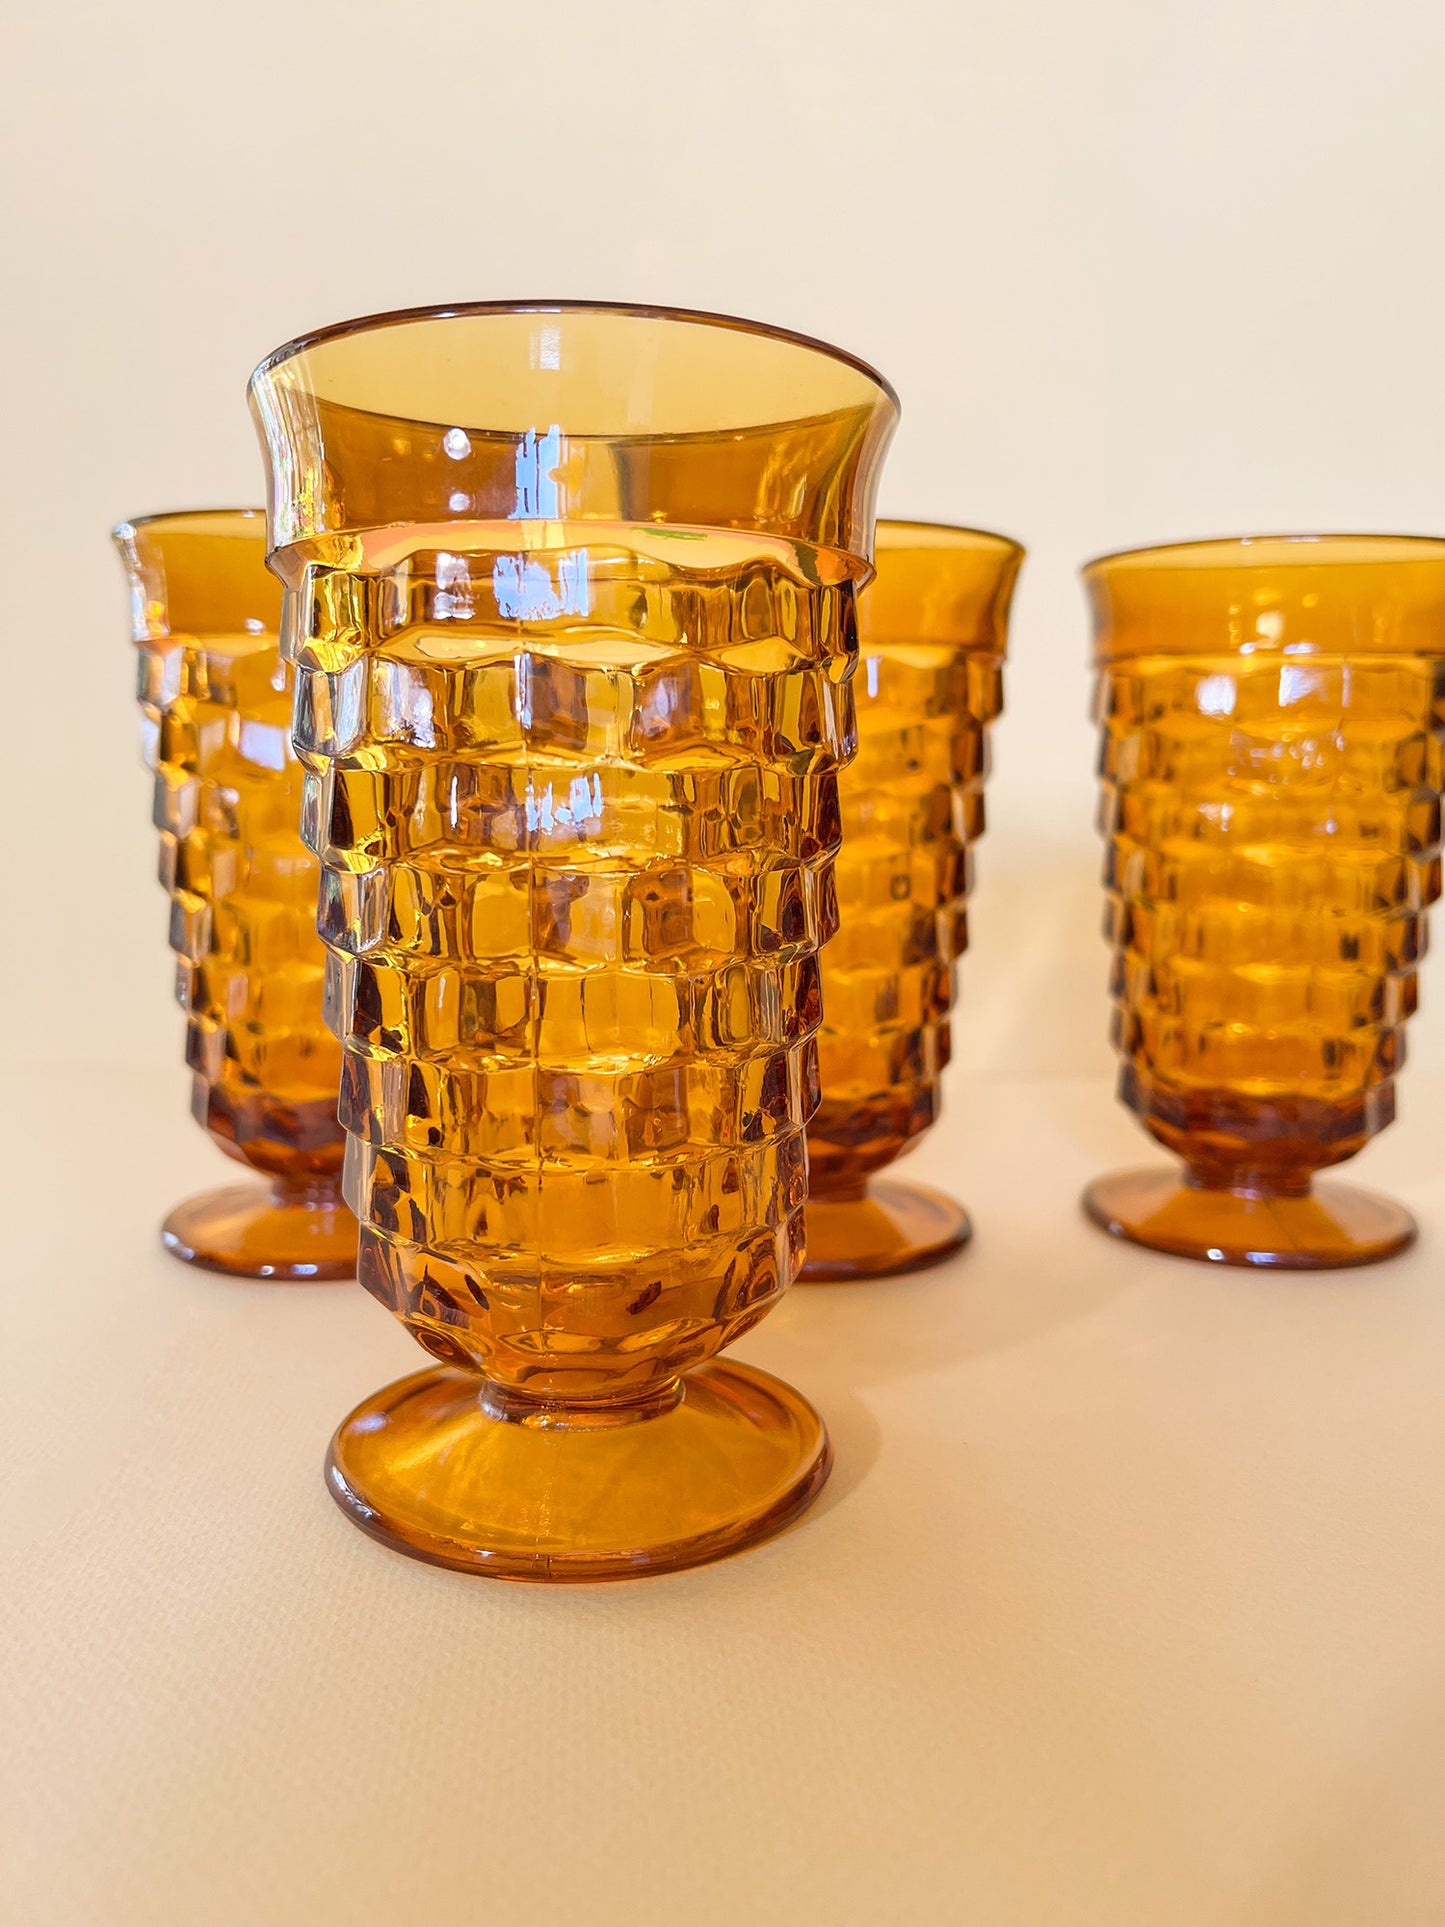 The Kitchen Committee Amber Tumblers "Whitehall"